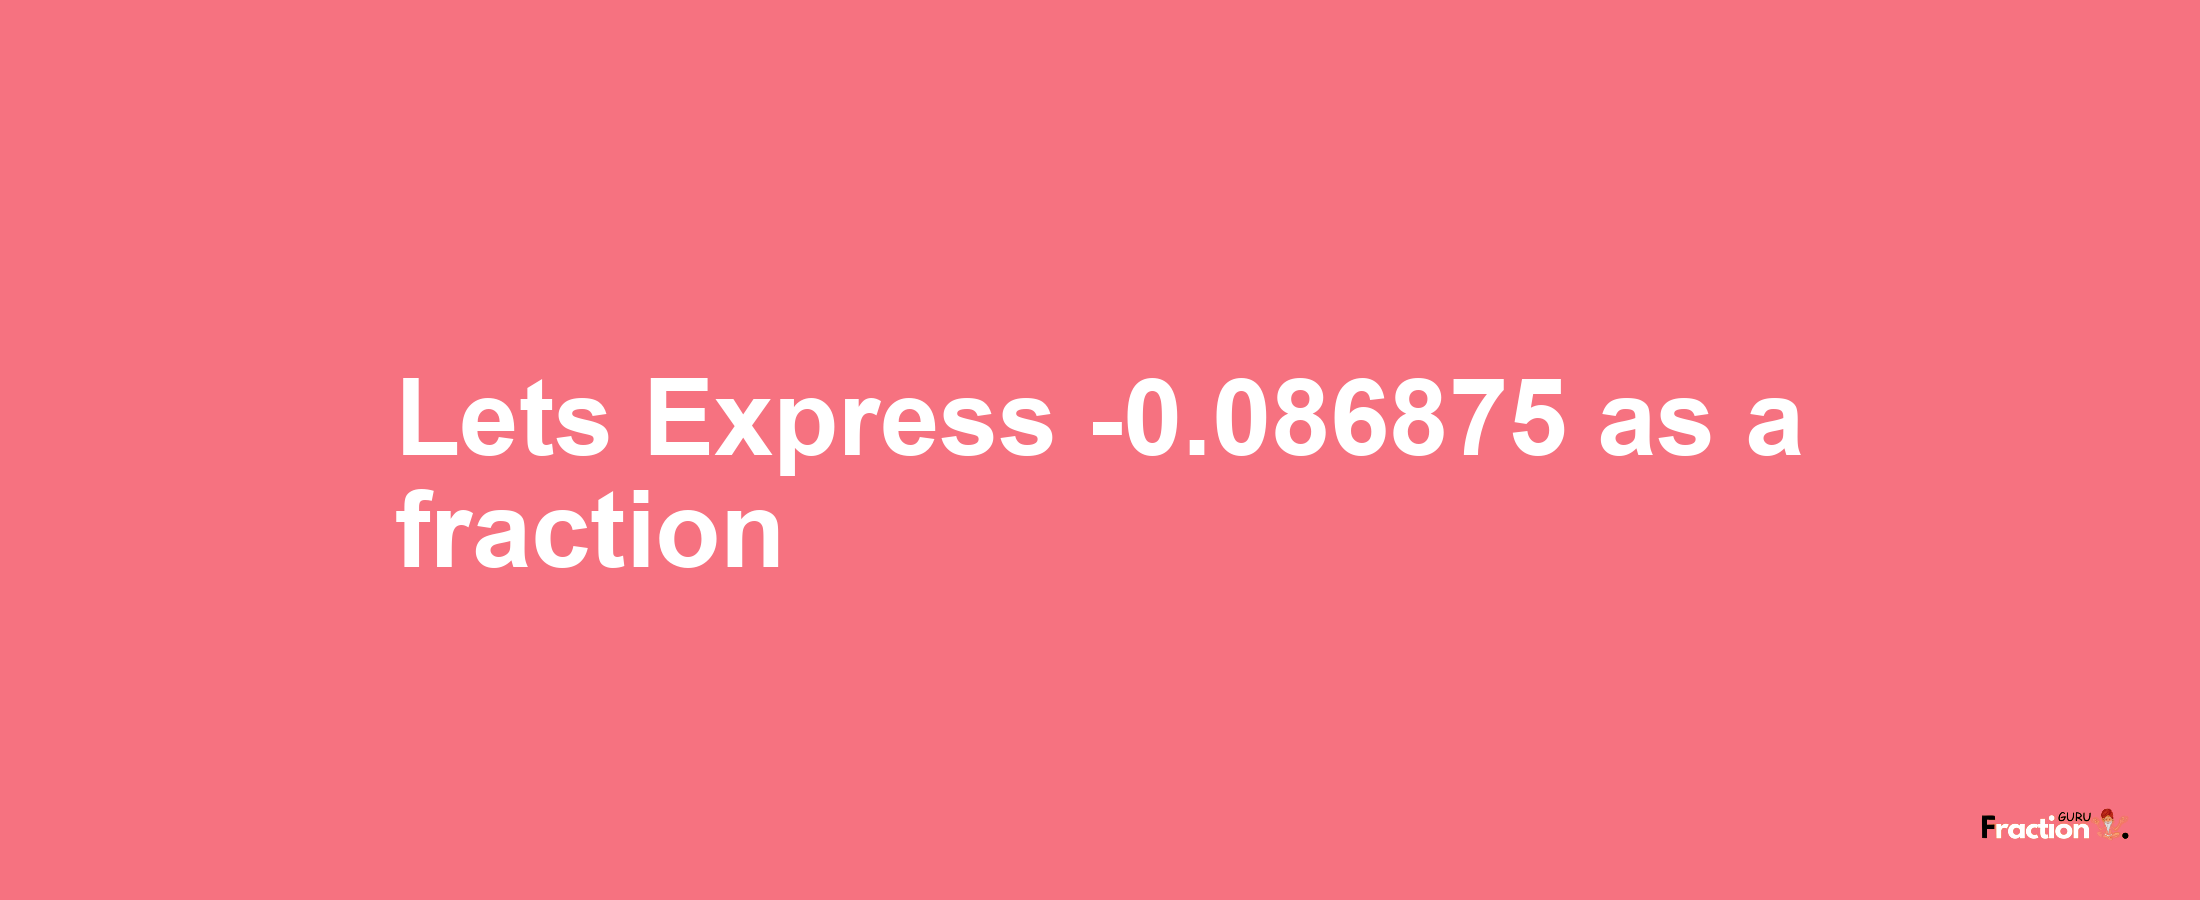 Lets Express -0.086875 as afraction